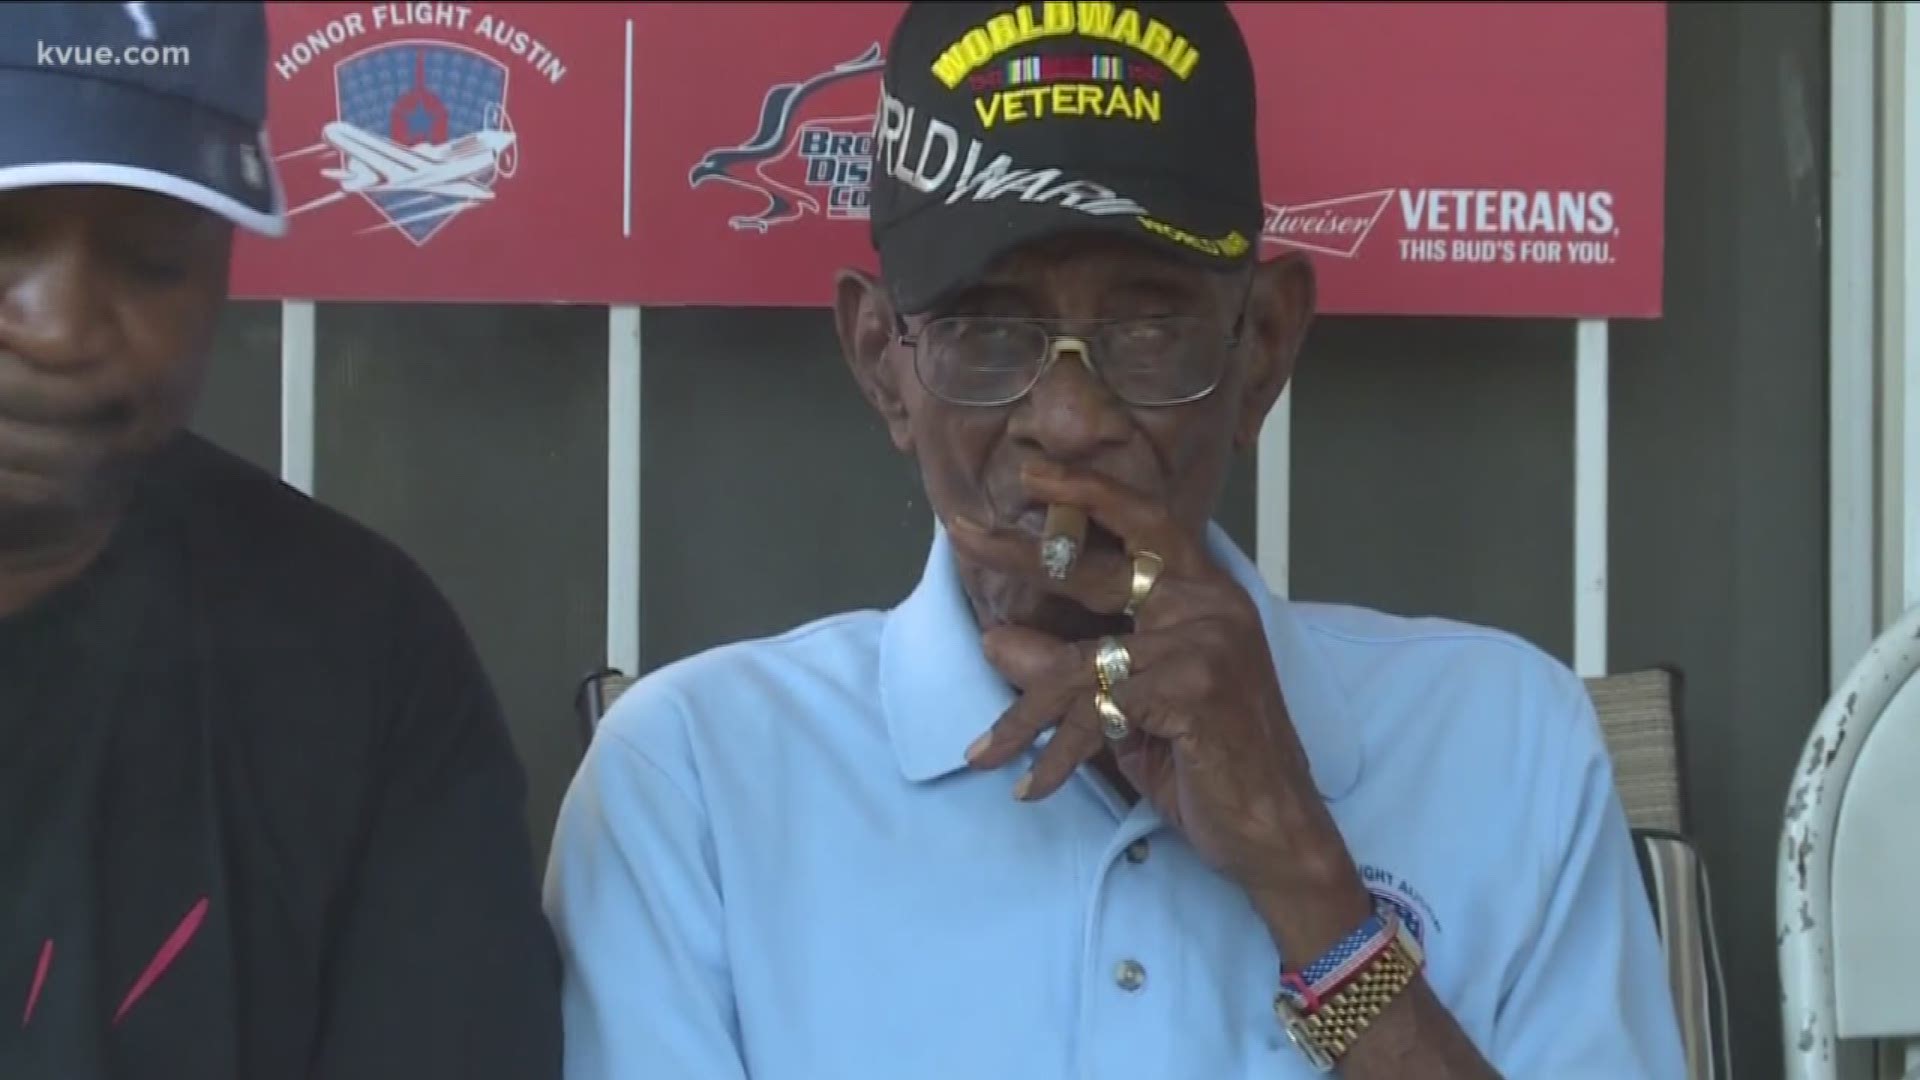 Austin and the nation are remembering Richard Overton, America's oldest WWII veteran who died. Mr. Overton's family gave KVUE's Rebeca Trejo a tour of his Austin home.